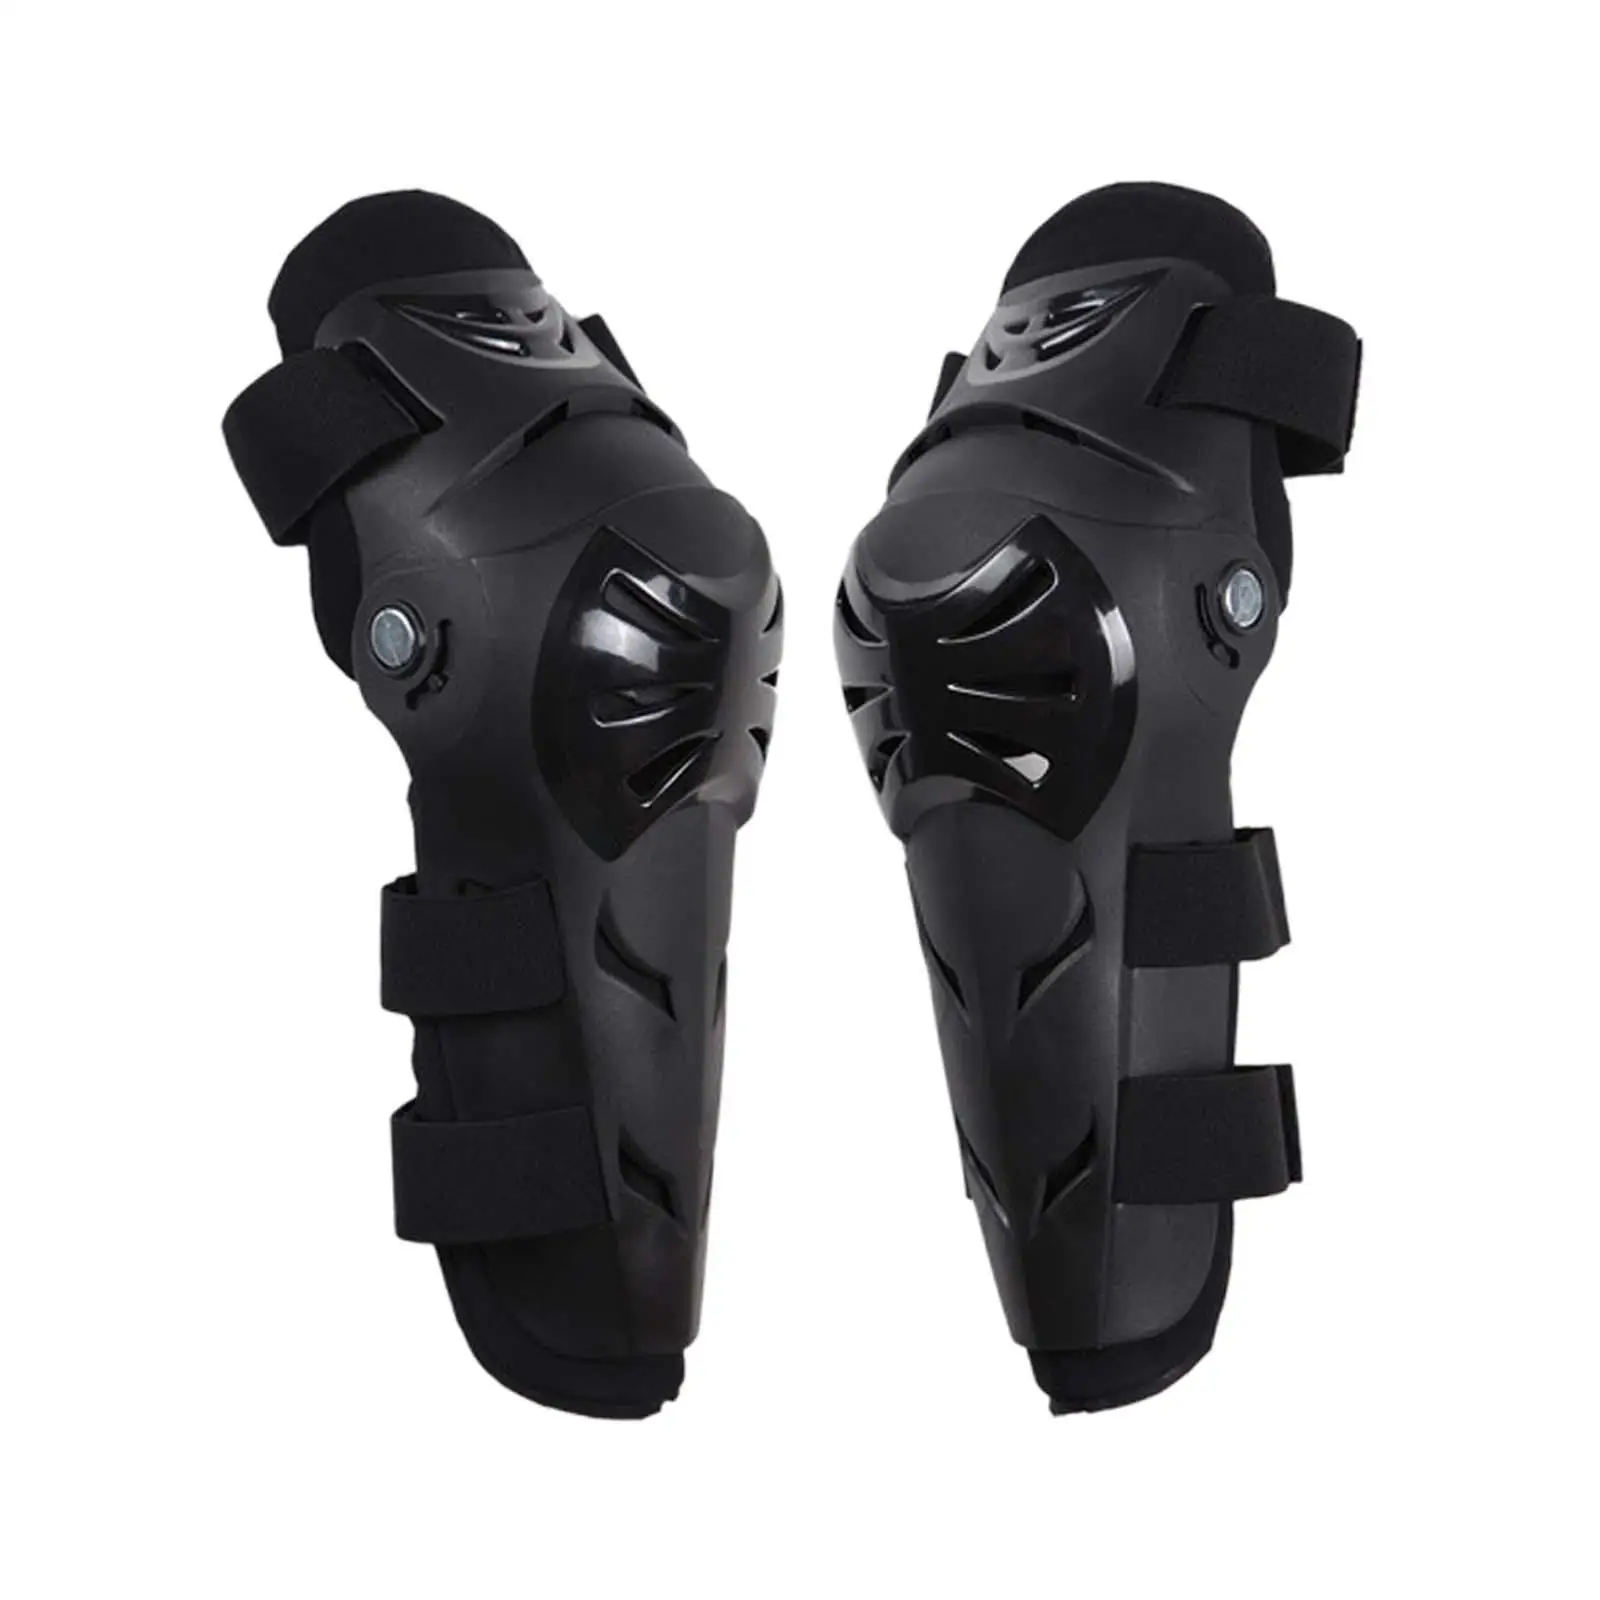 Motorcycle Knee Shin Guards Motocross Riding Guards Set Protective Knee Guard Pads for Sport Skating Motocross Skiing